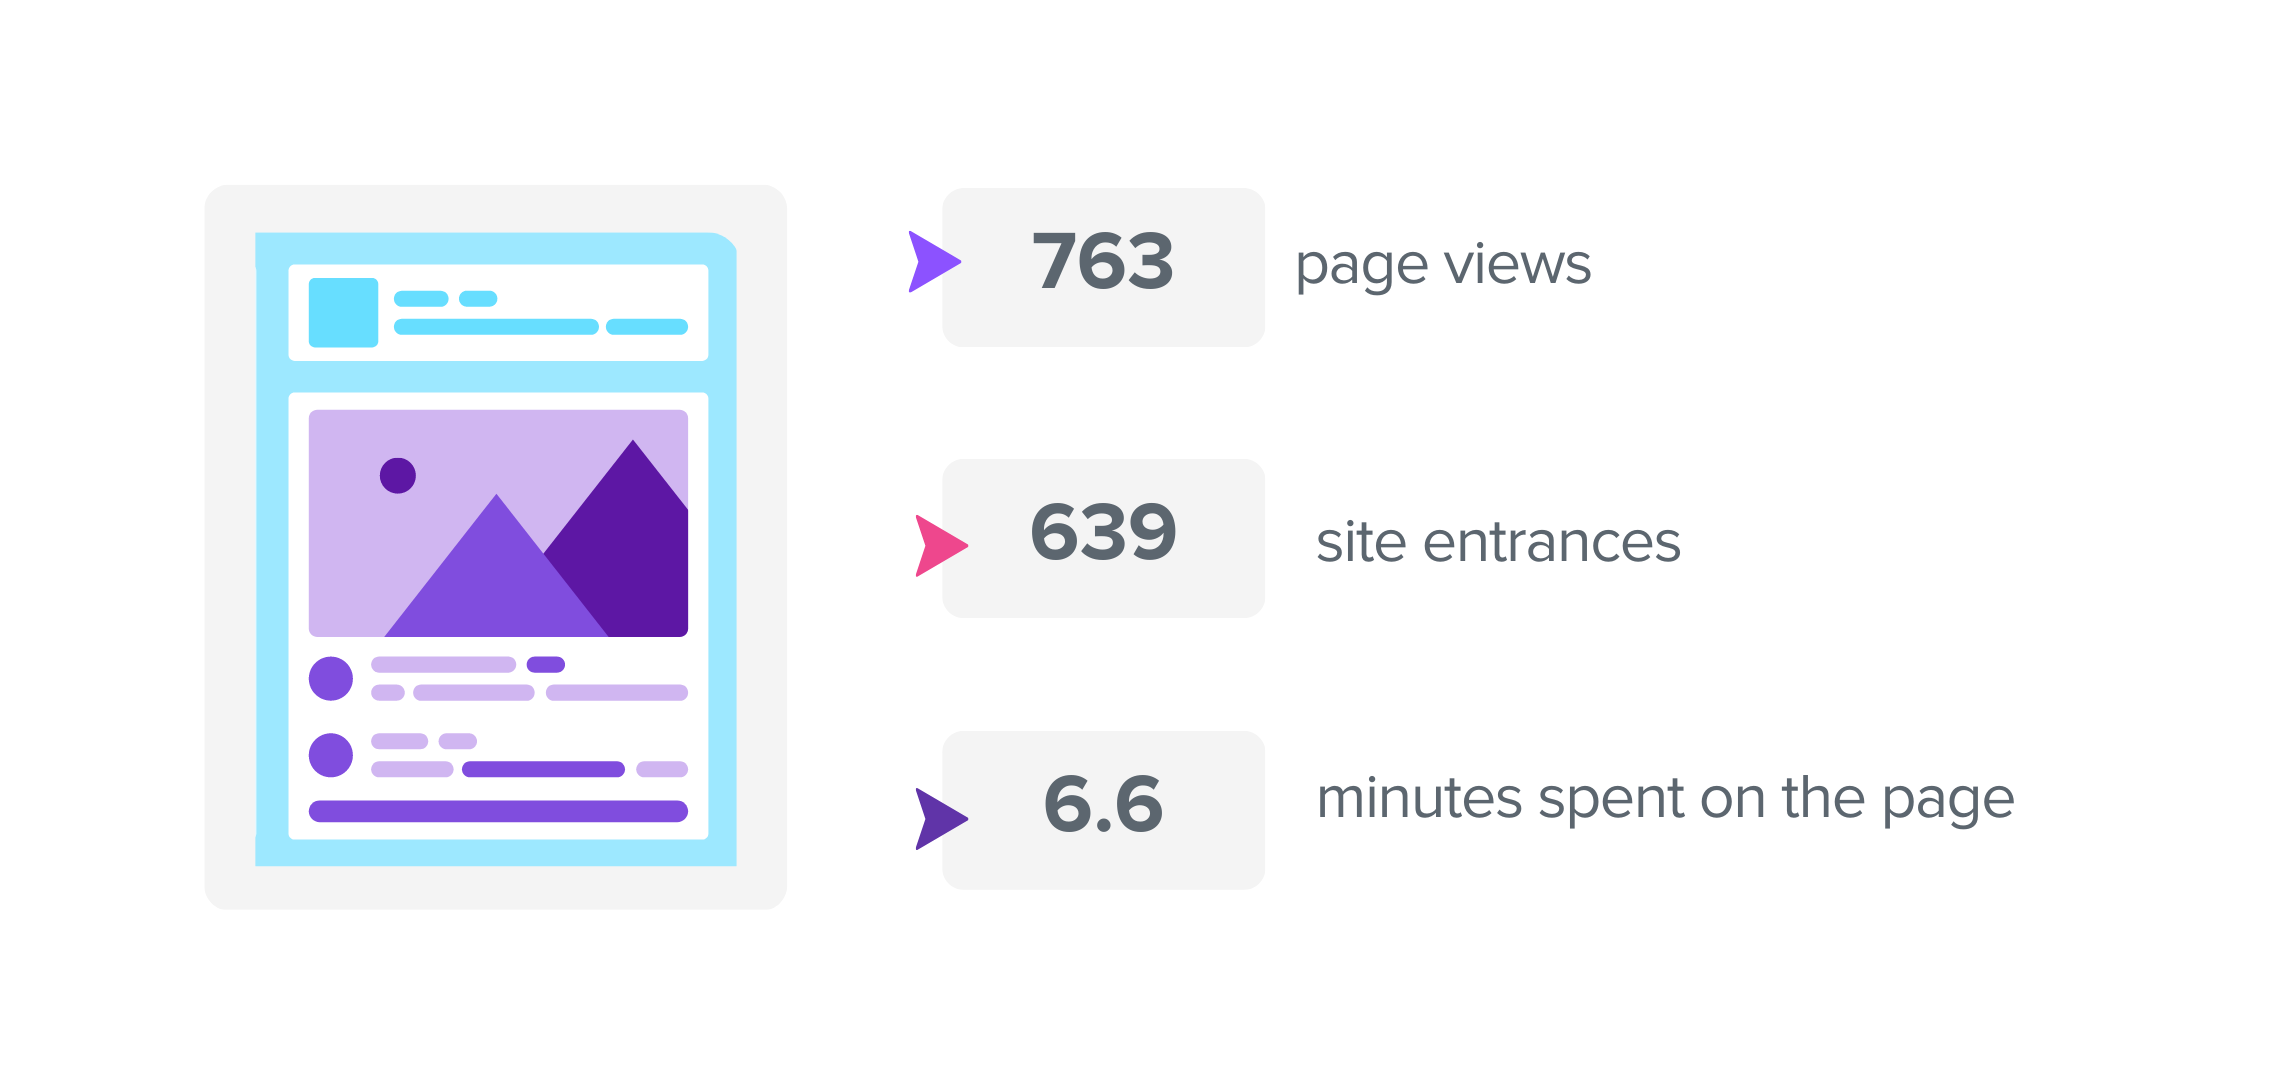 763 page views, 639 site entrances, 6.6 minutes spent on the page